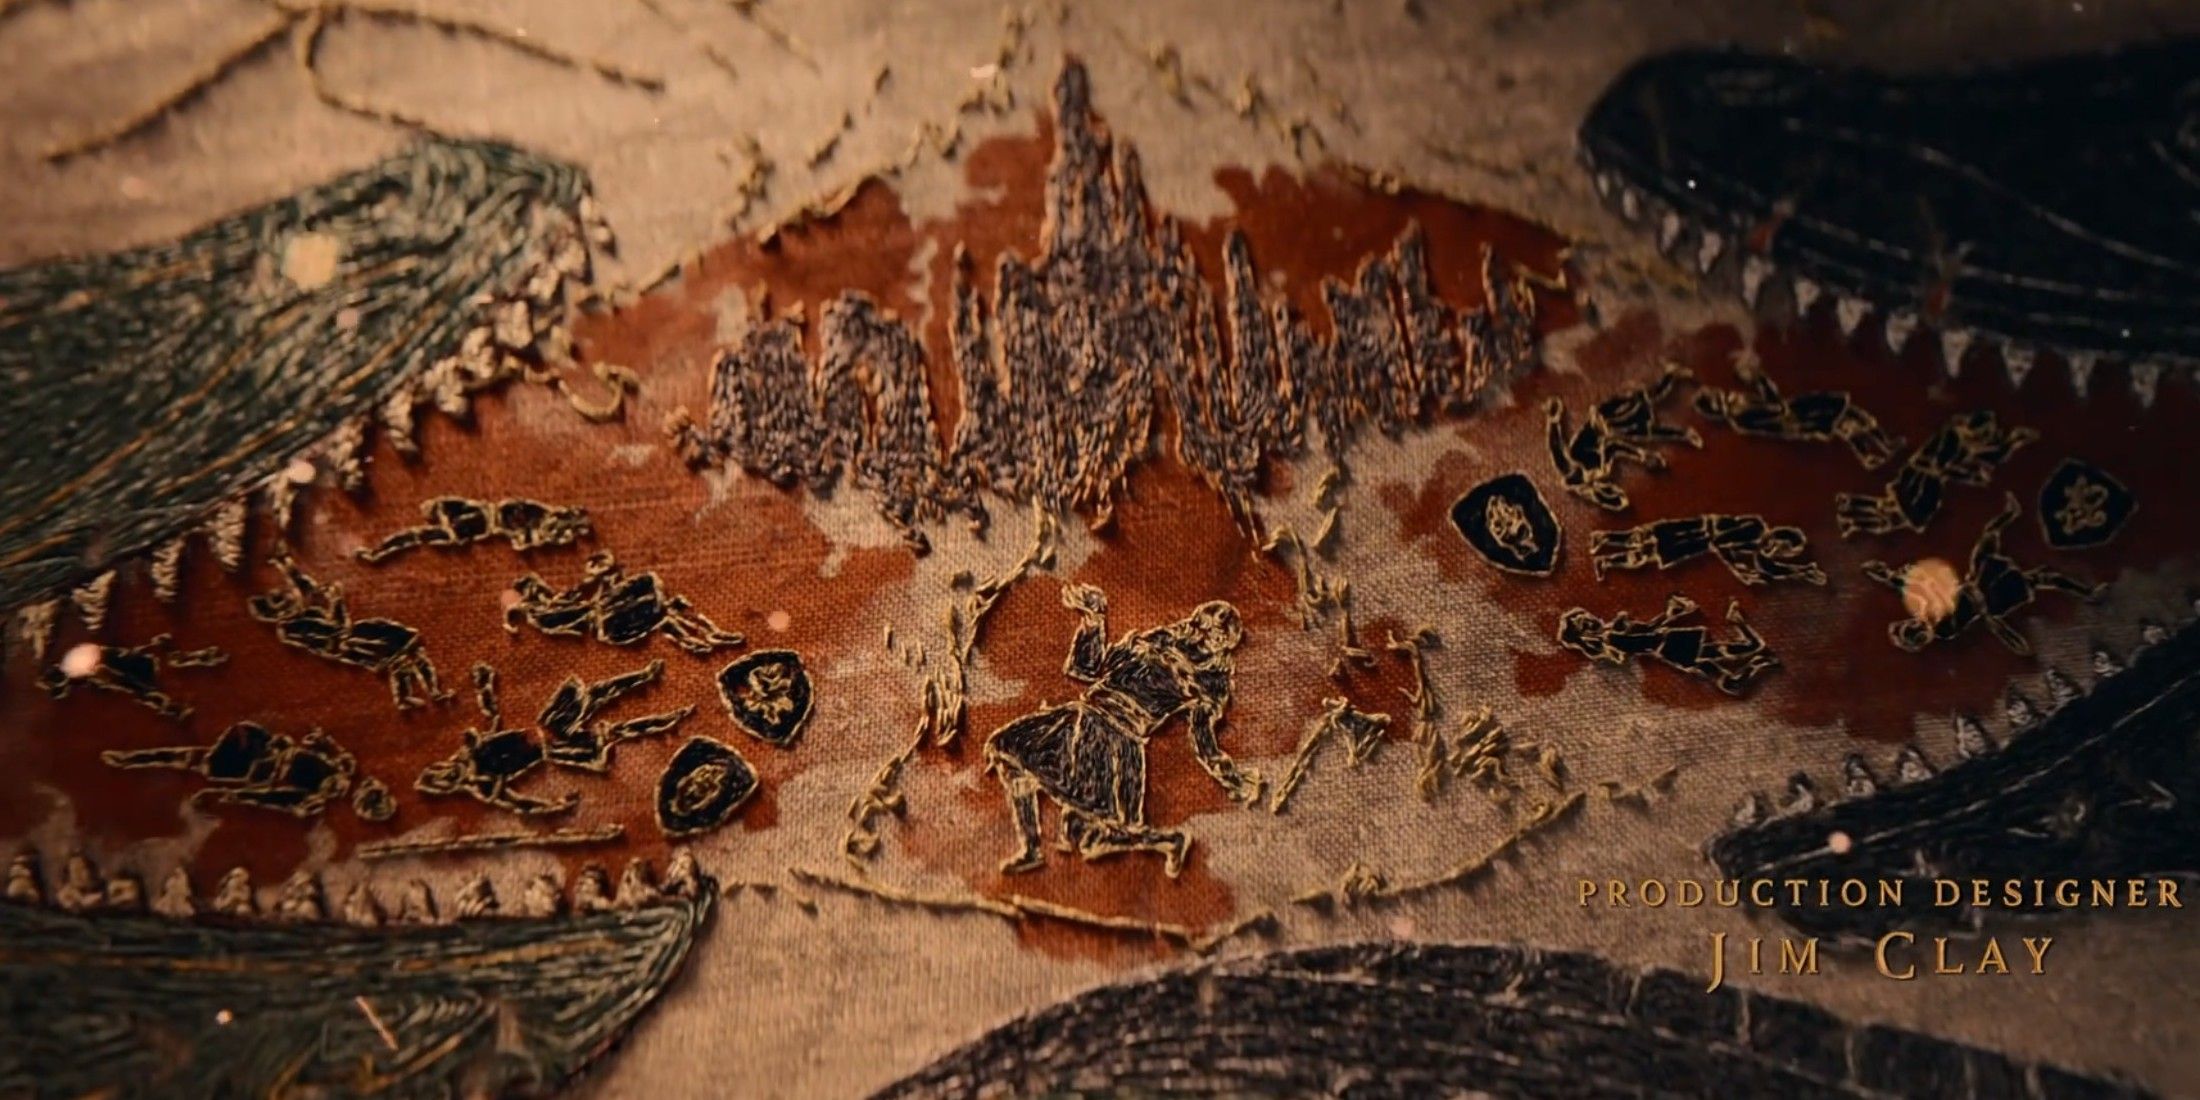 Tapestry art of the burning of Harrenhal in House of the Dragon's season 2 opening credits